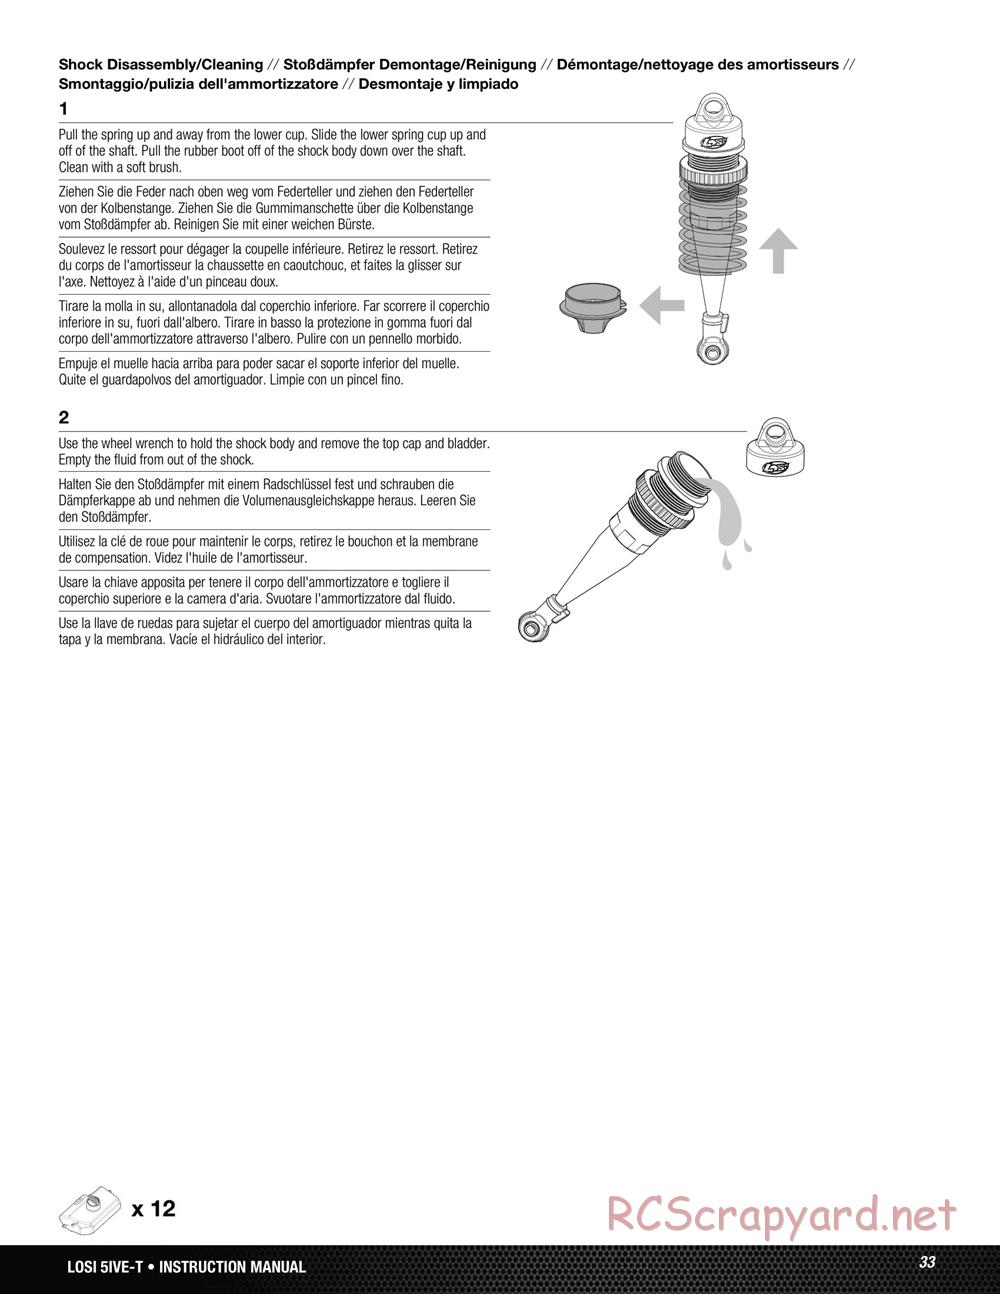 Team Losi - 5ive-T Roller - Manual - Page 33